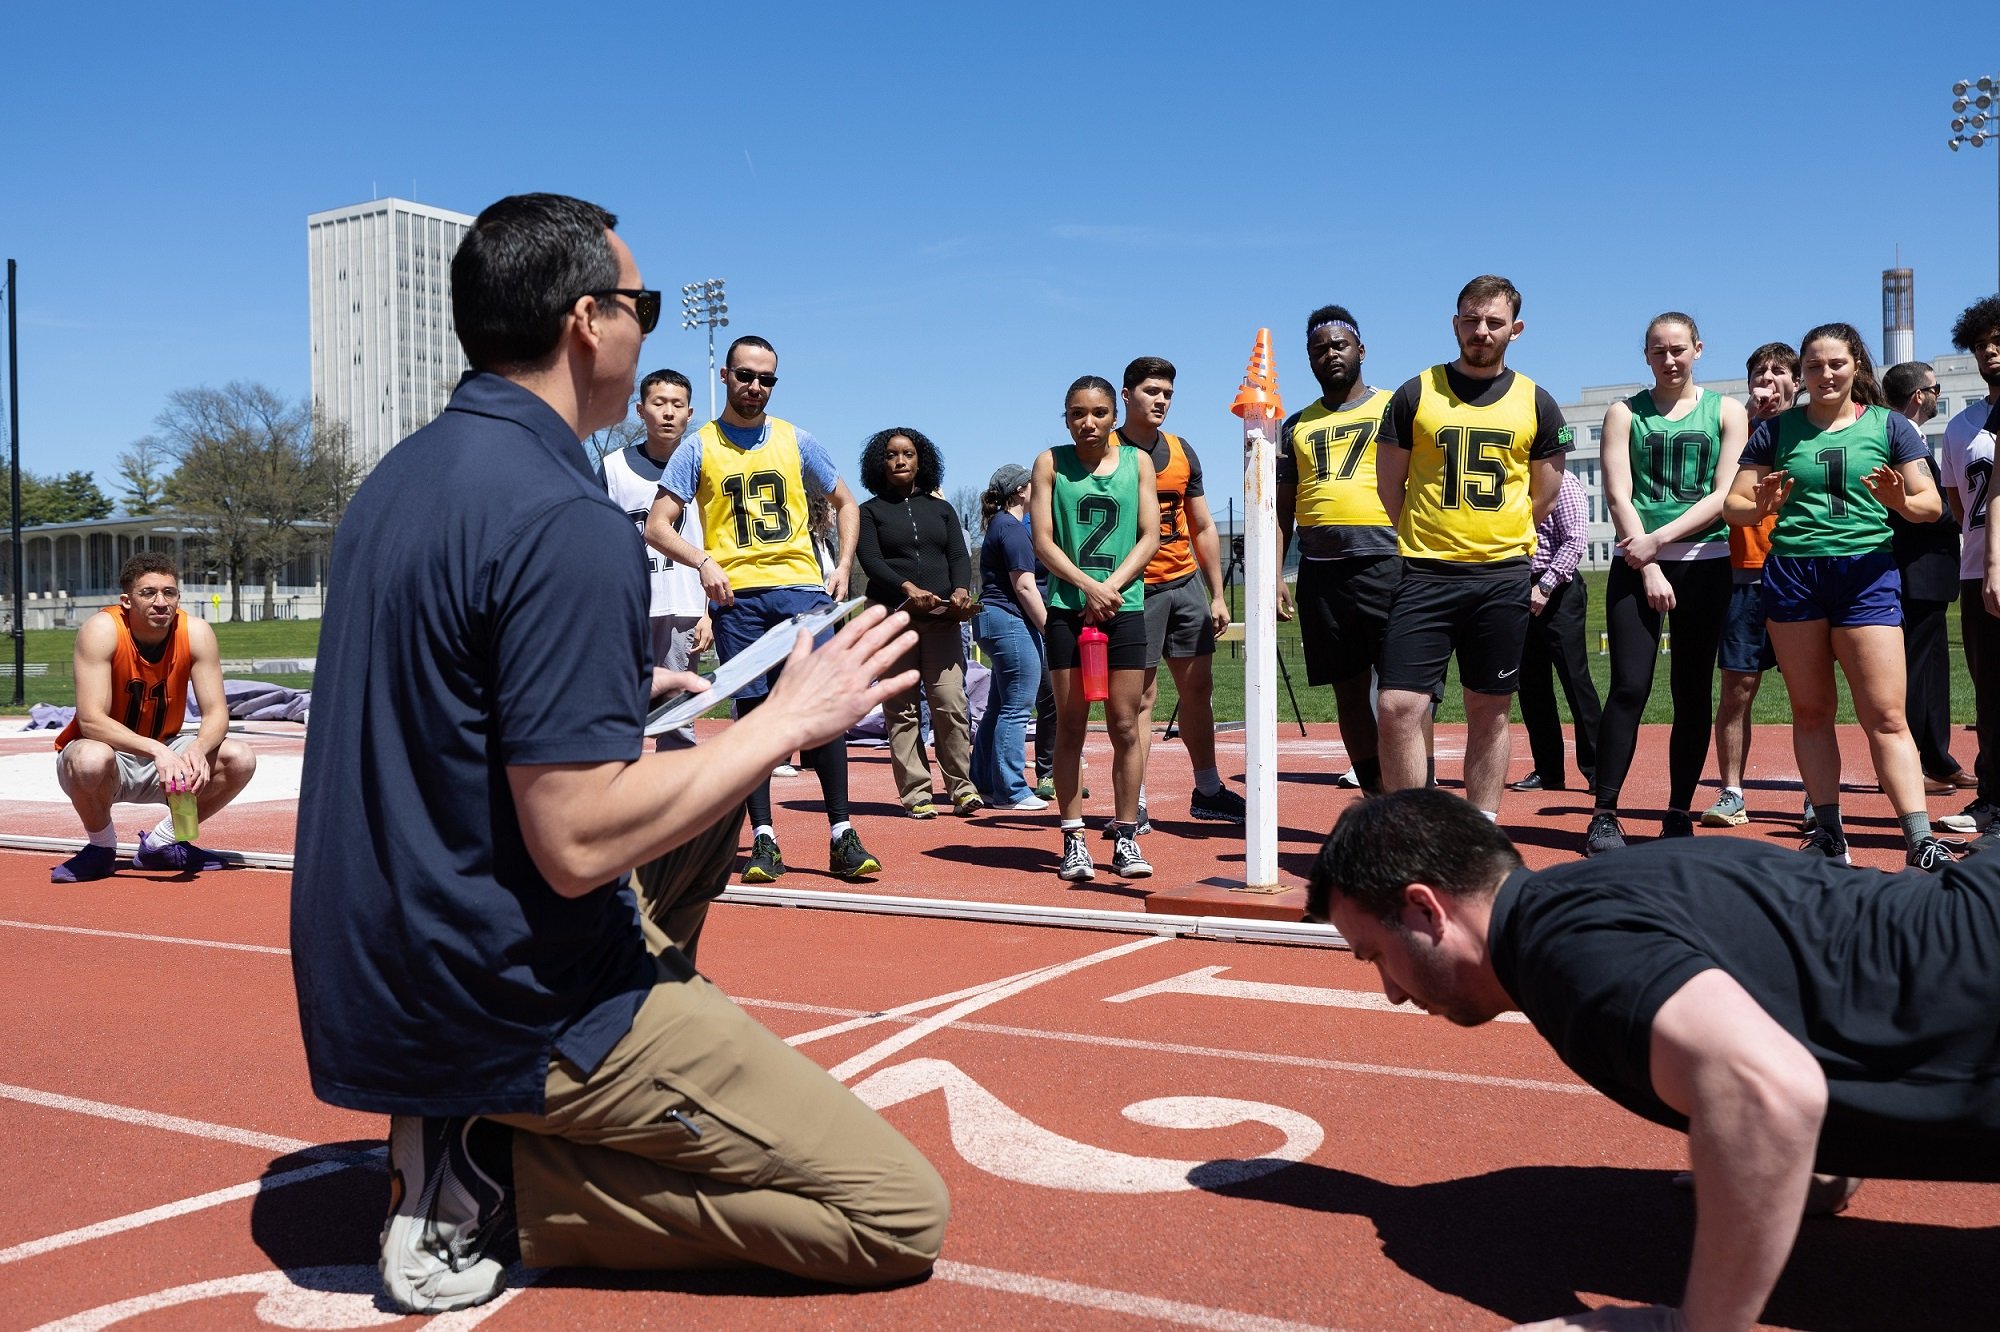 A member of the FBI Albany Field Office talks with students before the start of the physical fitness test at UAlbany.